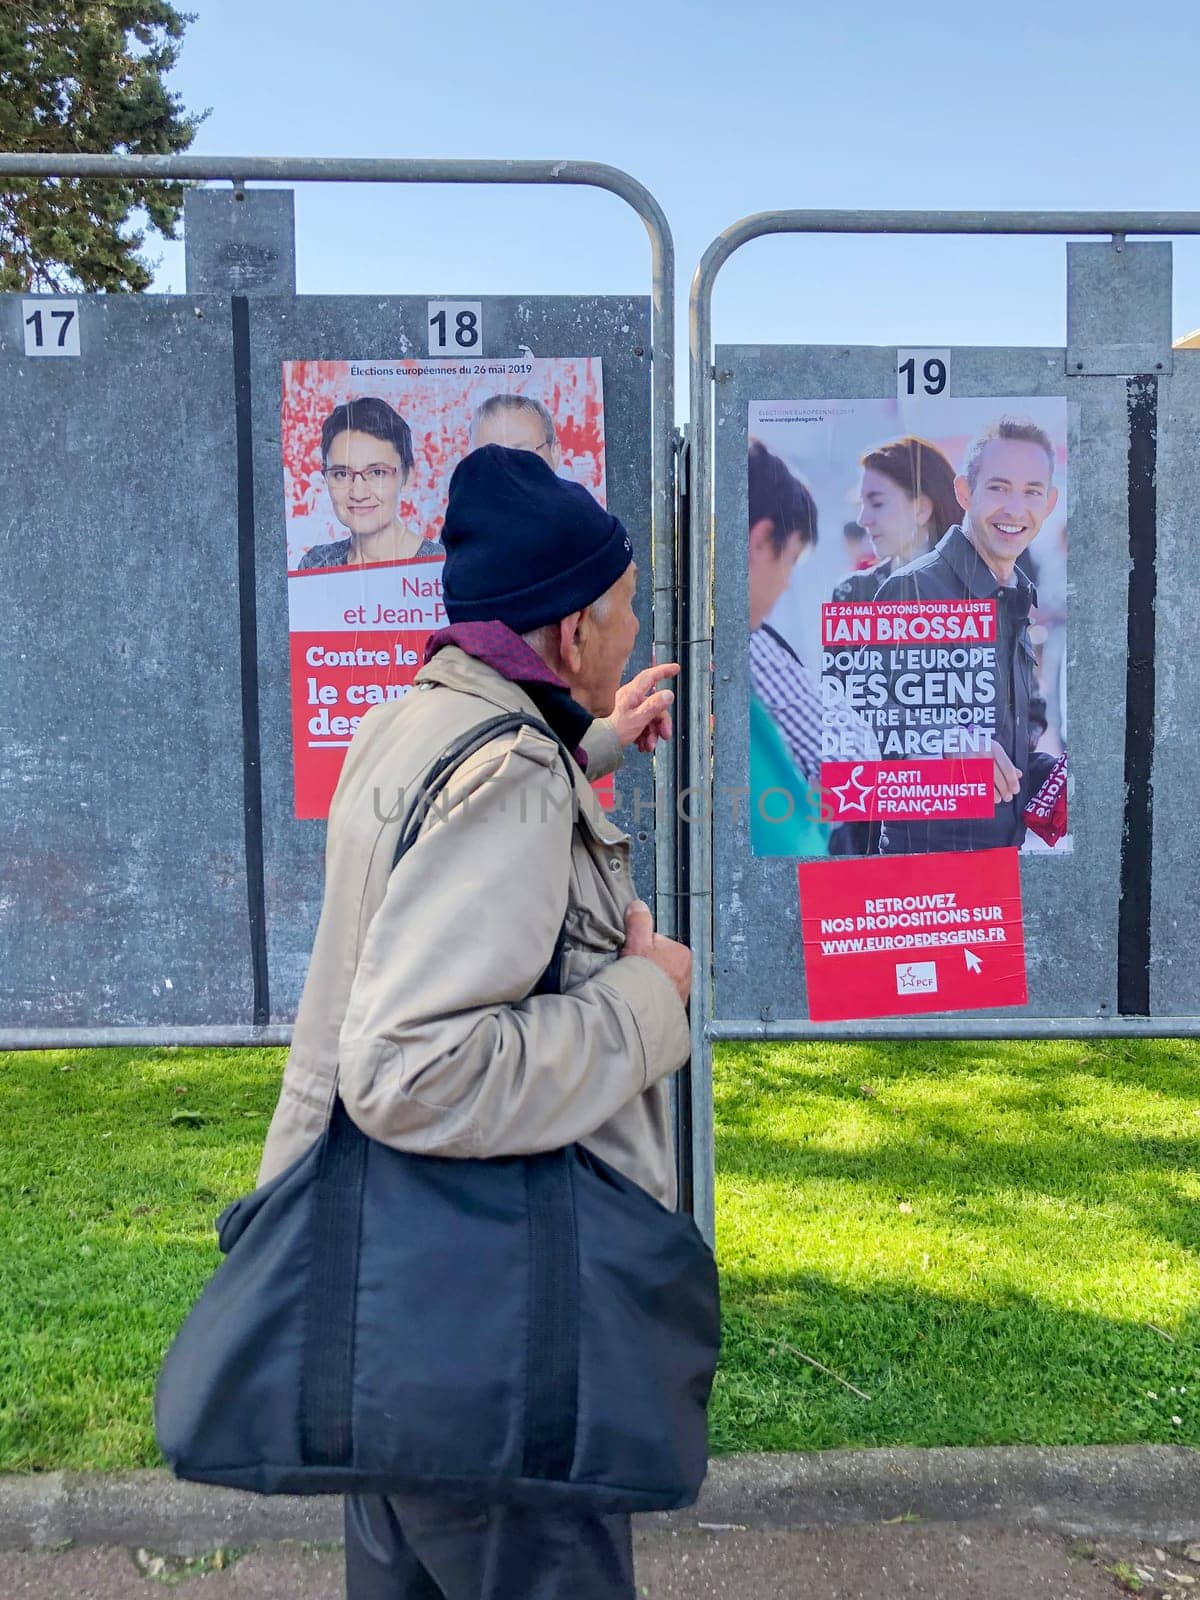 DIEPPE, FRANCE - MAY 15, 2019 : Man looks at the banner with candidates for elections to the European Union in May 2019